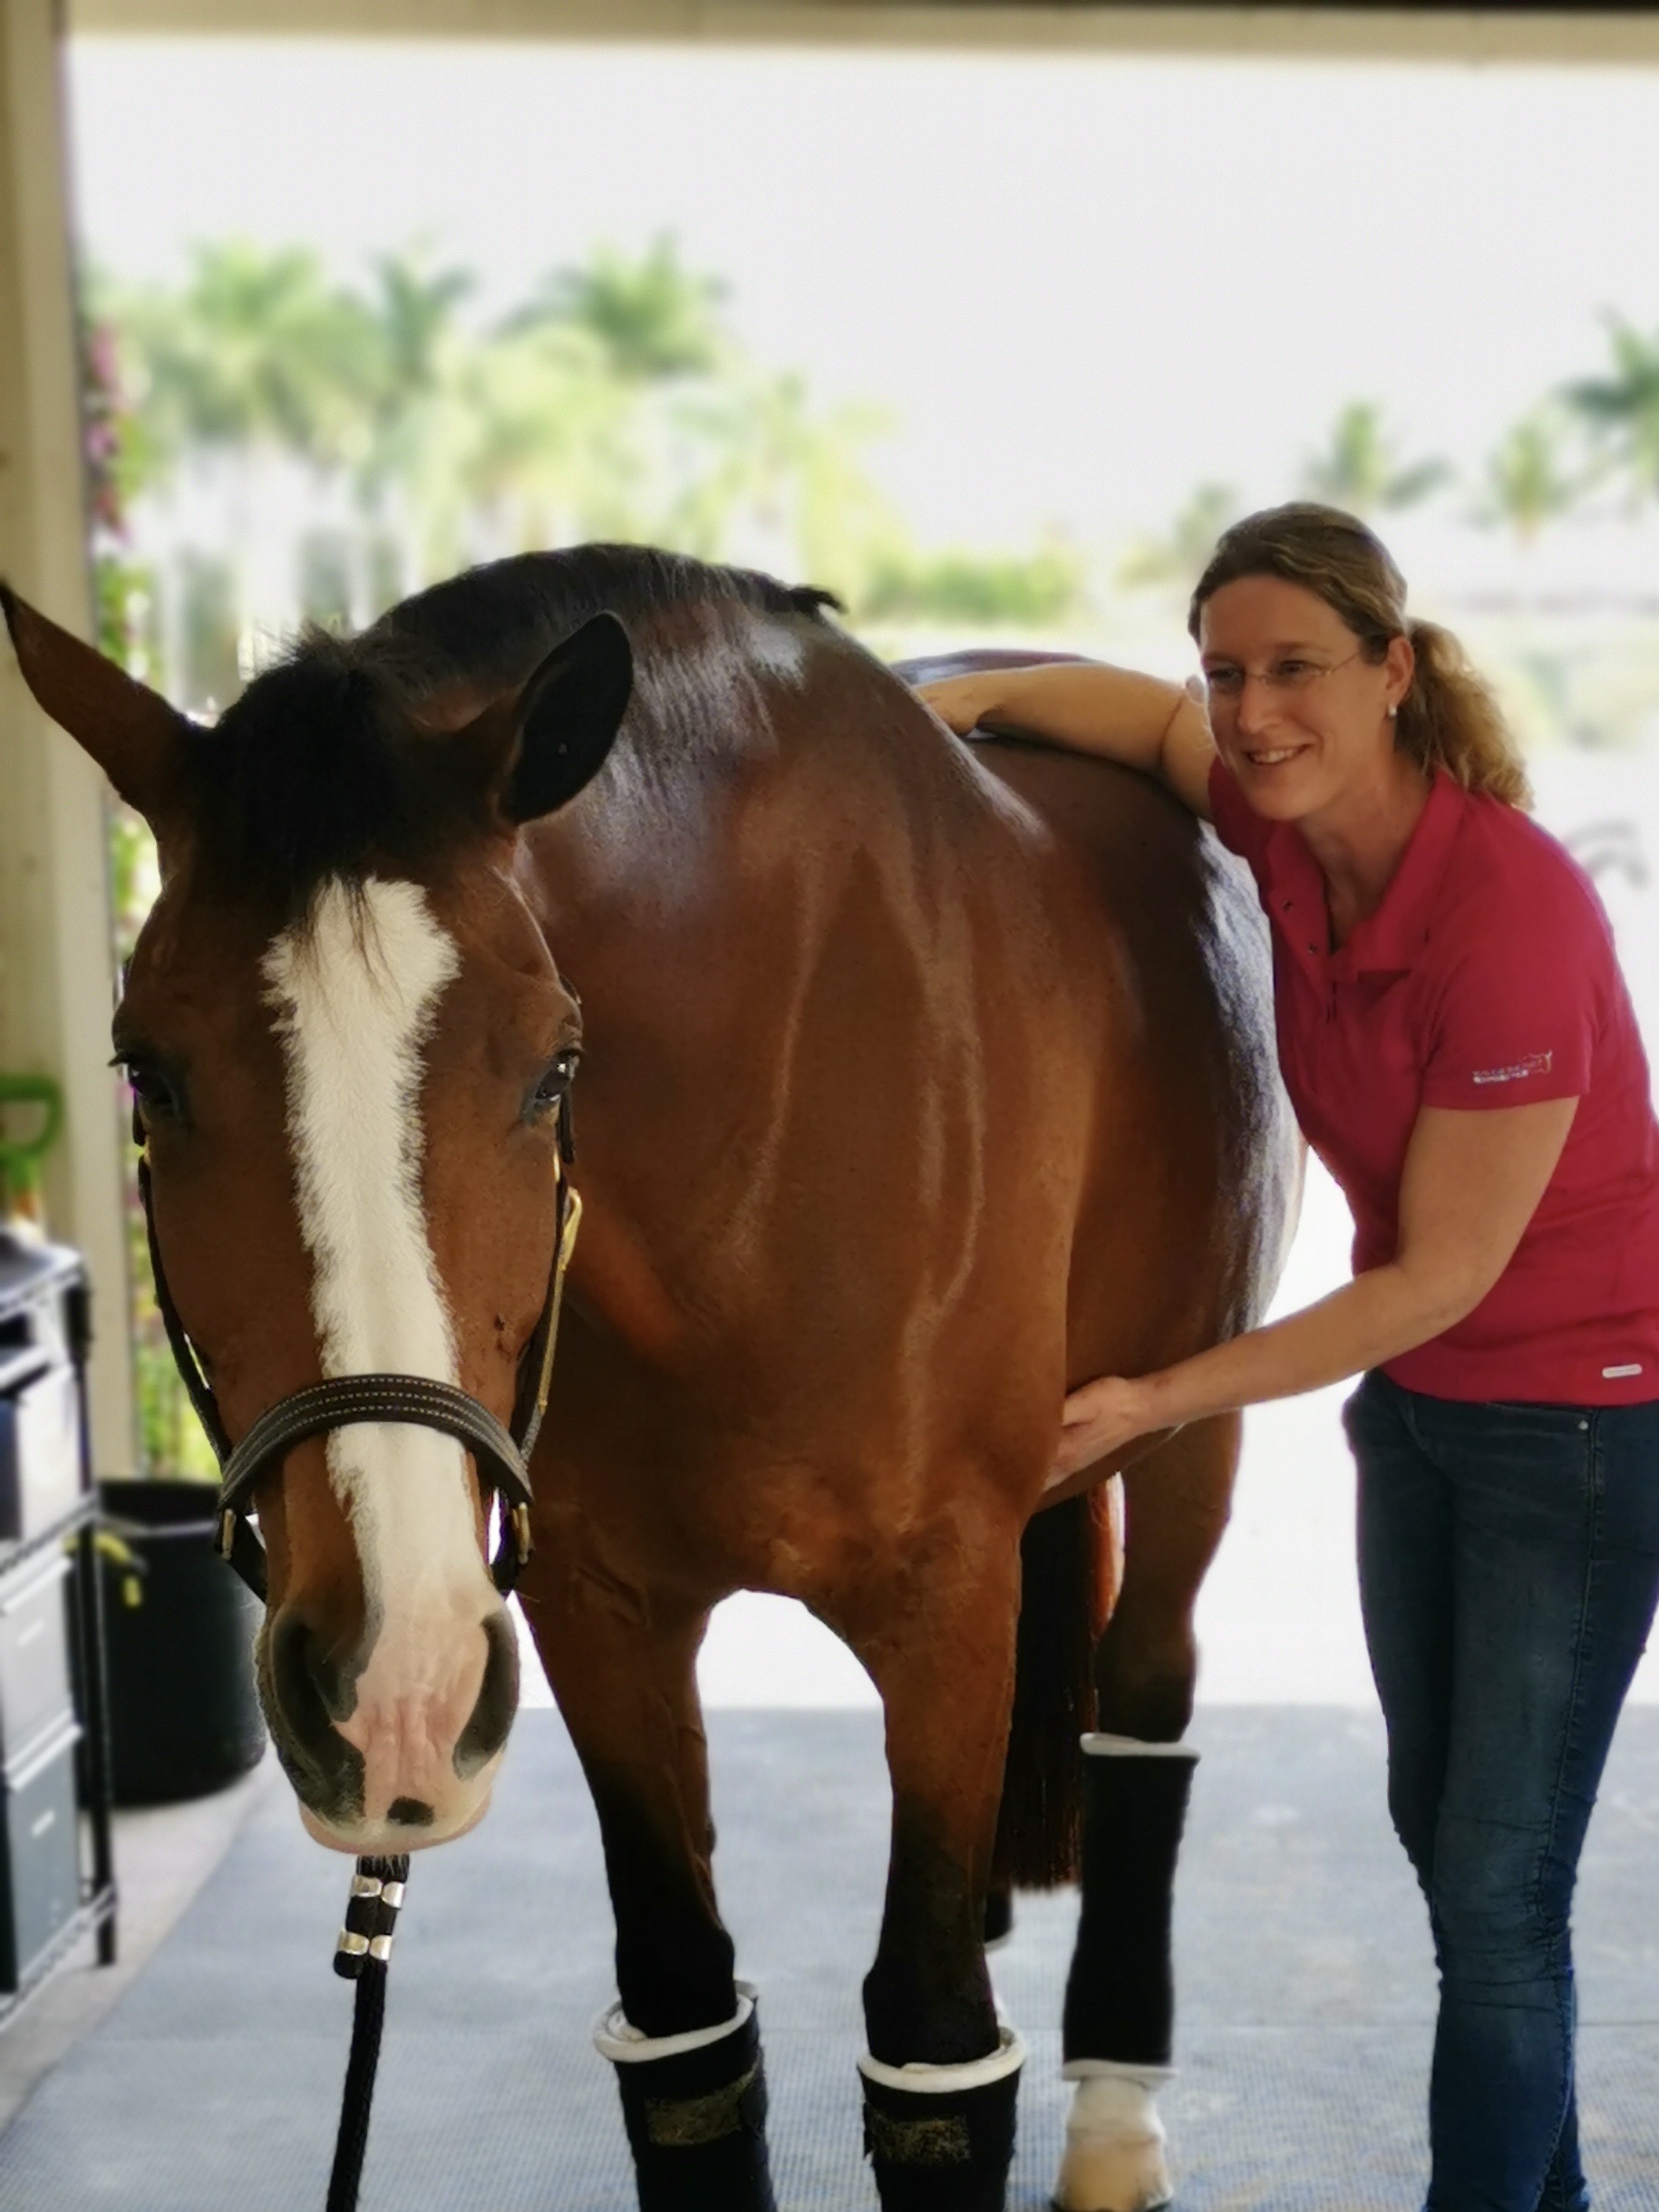 Martine Burgers — Contributing writer for Horse Grooms